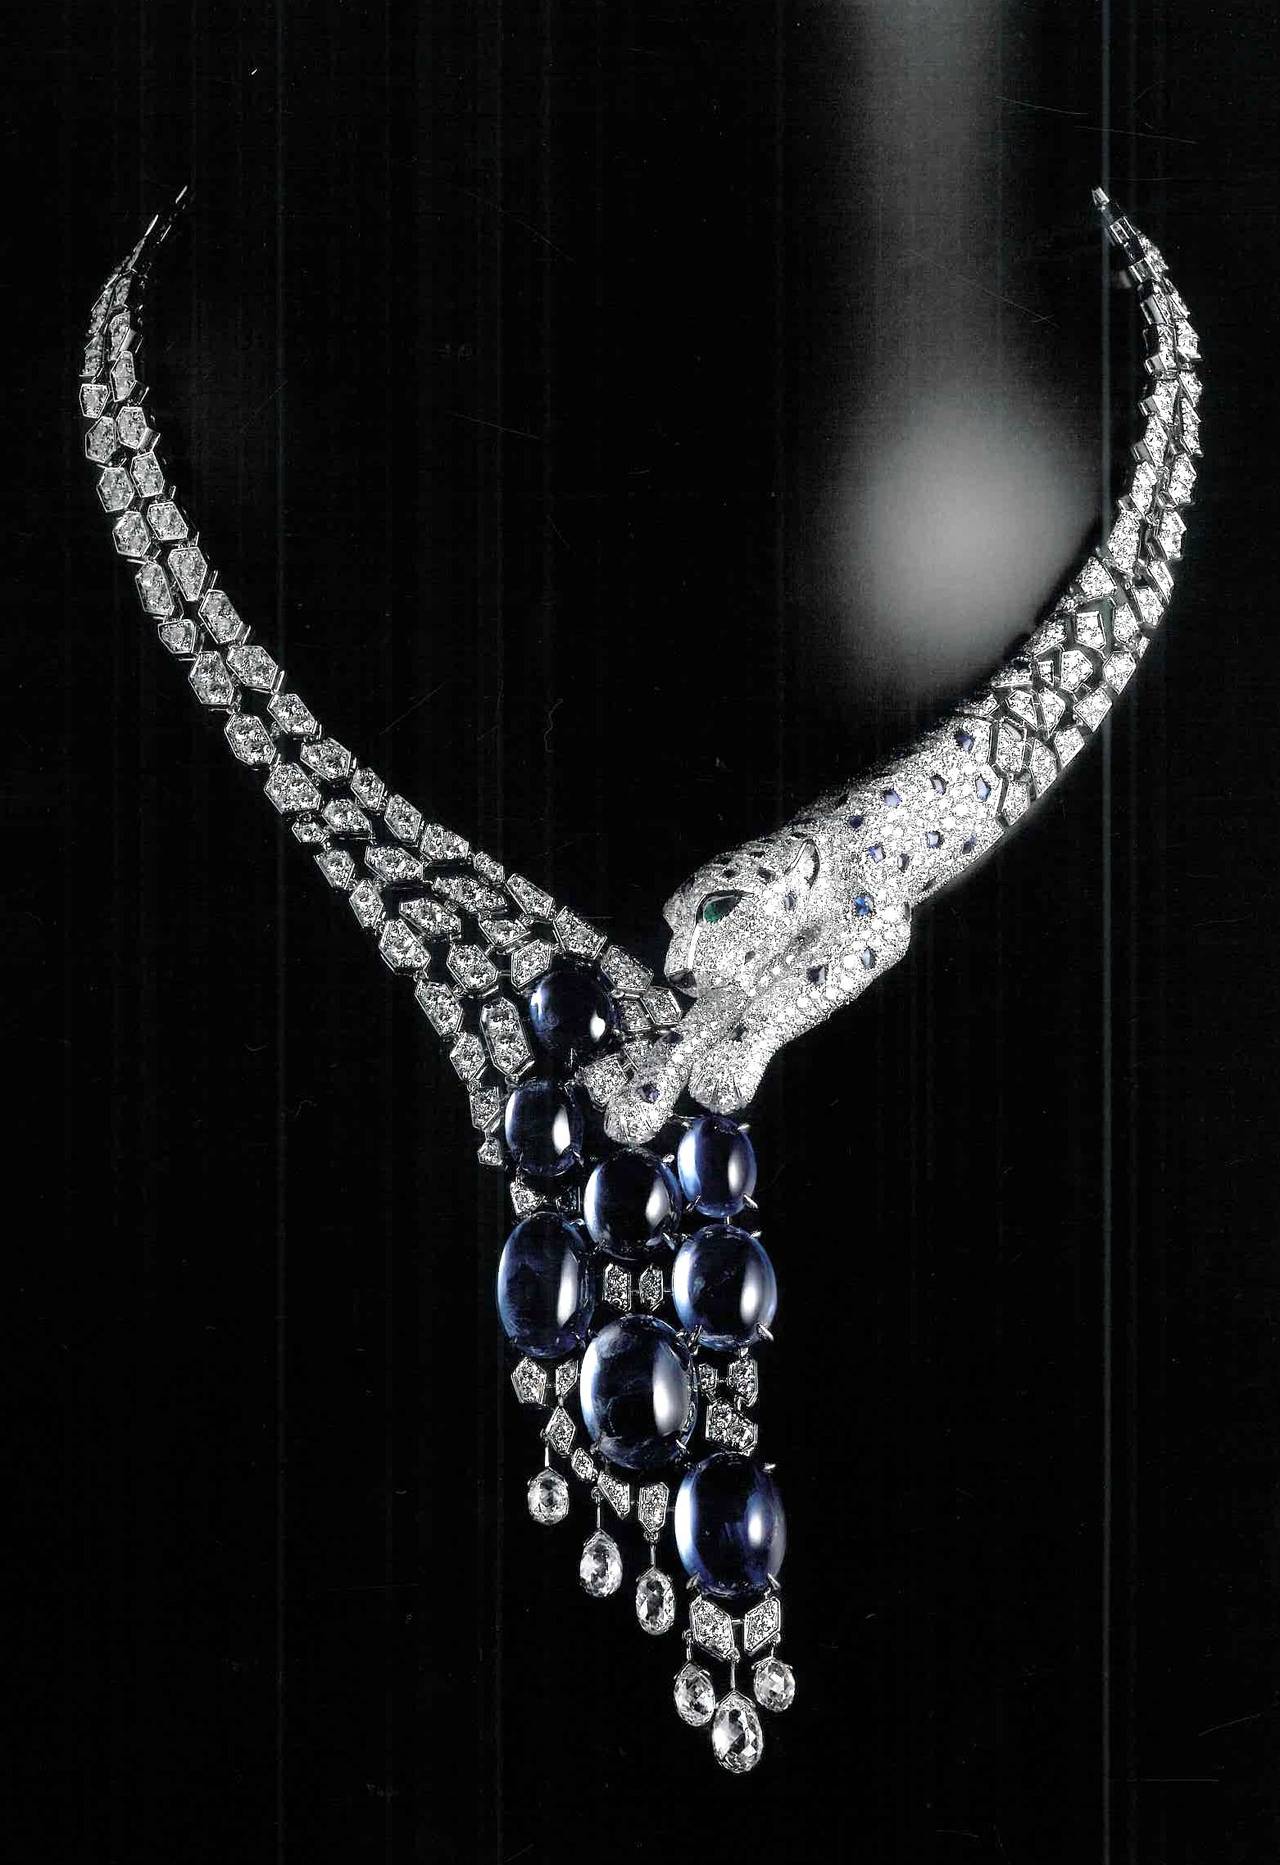 Book of HIGH JEWELRY by CARTIER - Contemporary Creations 1